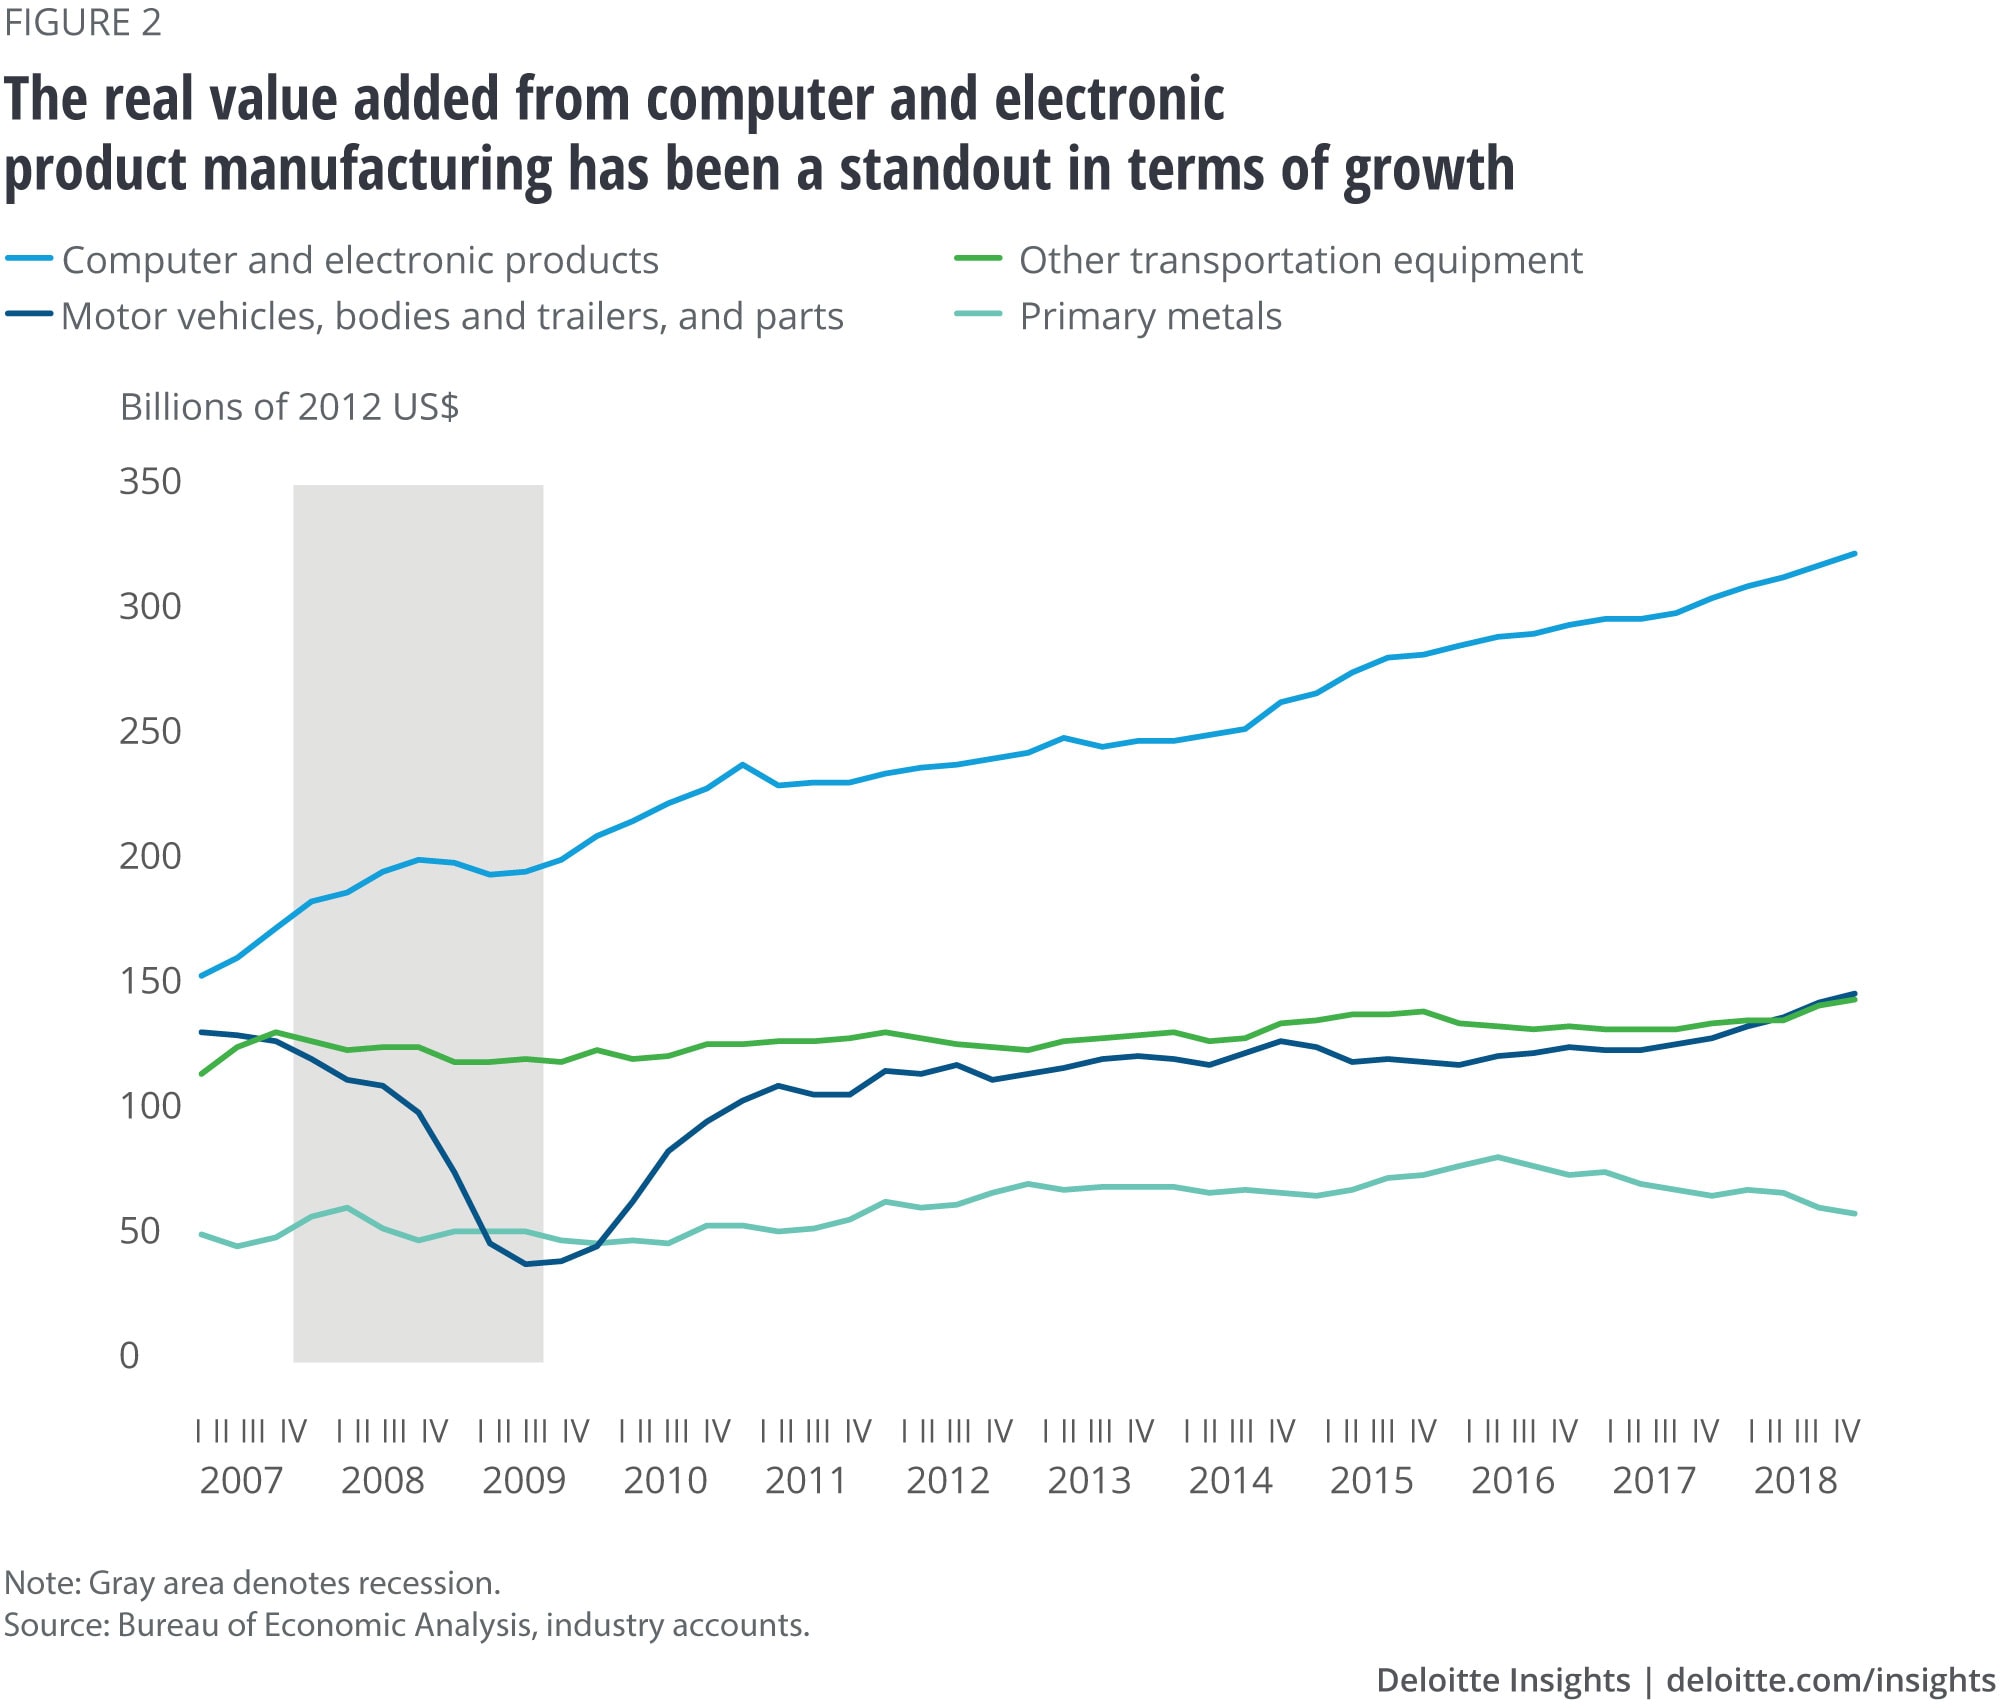 The real value added from computer and electronic product manufacturing has been a standout in terms of growth